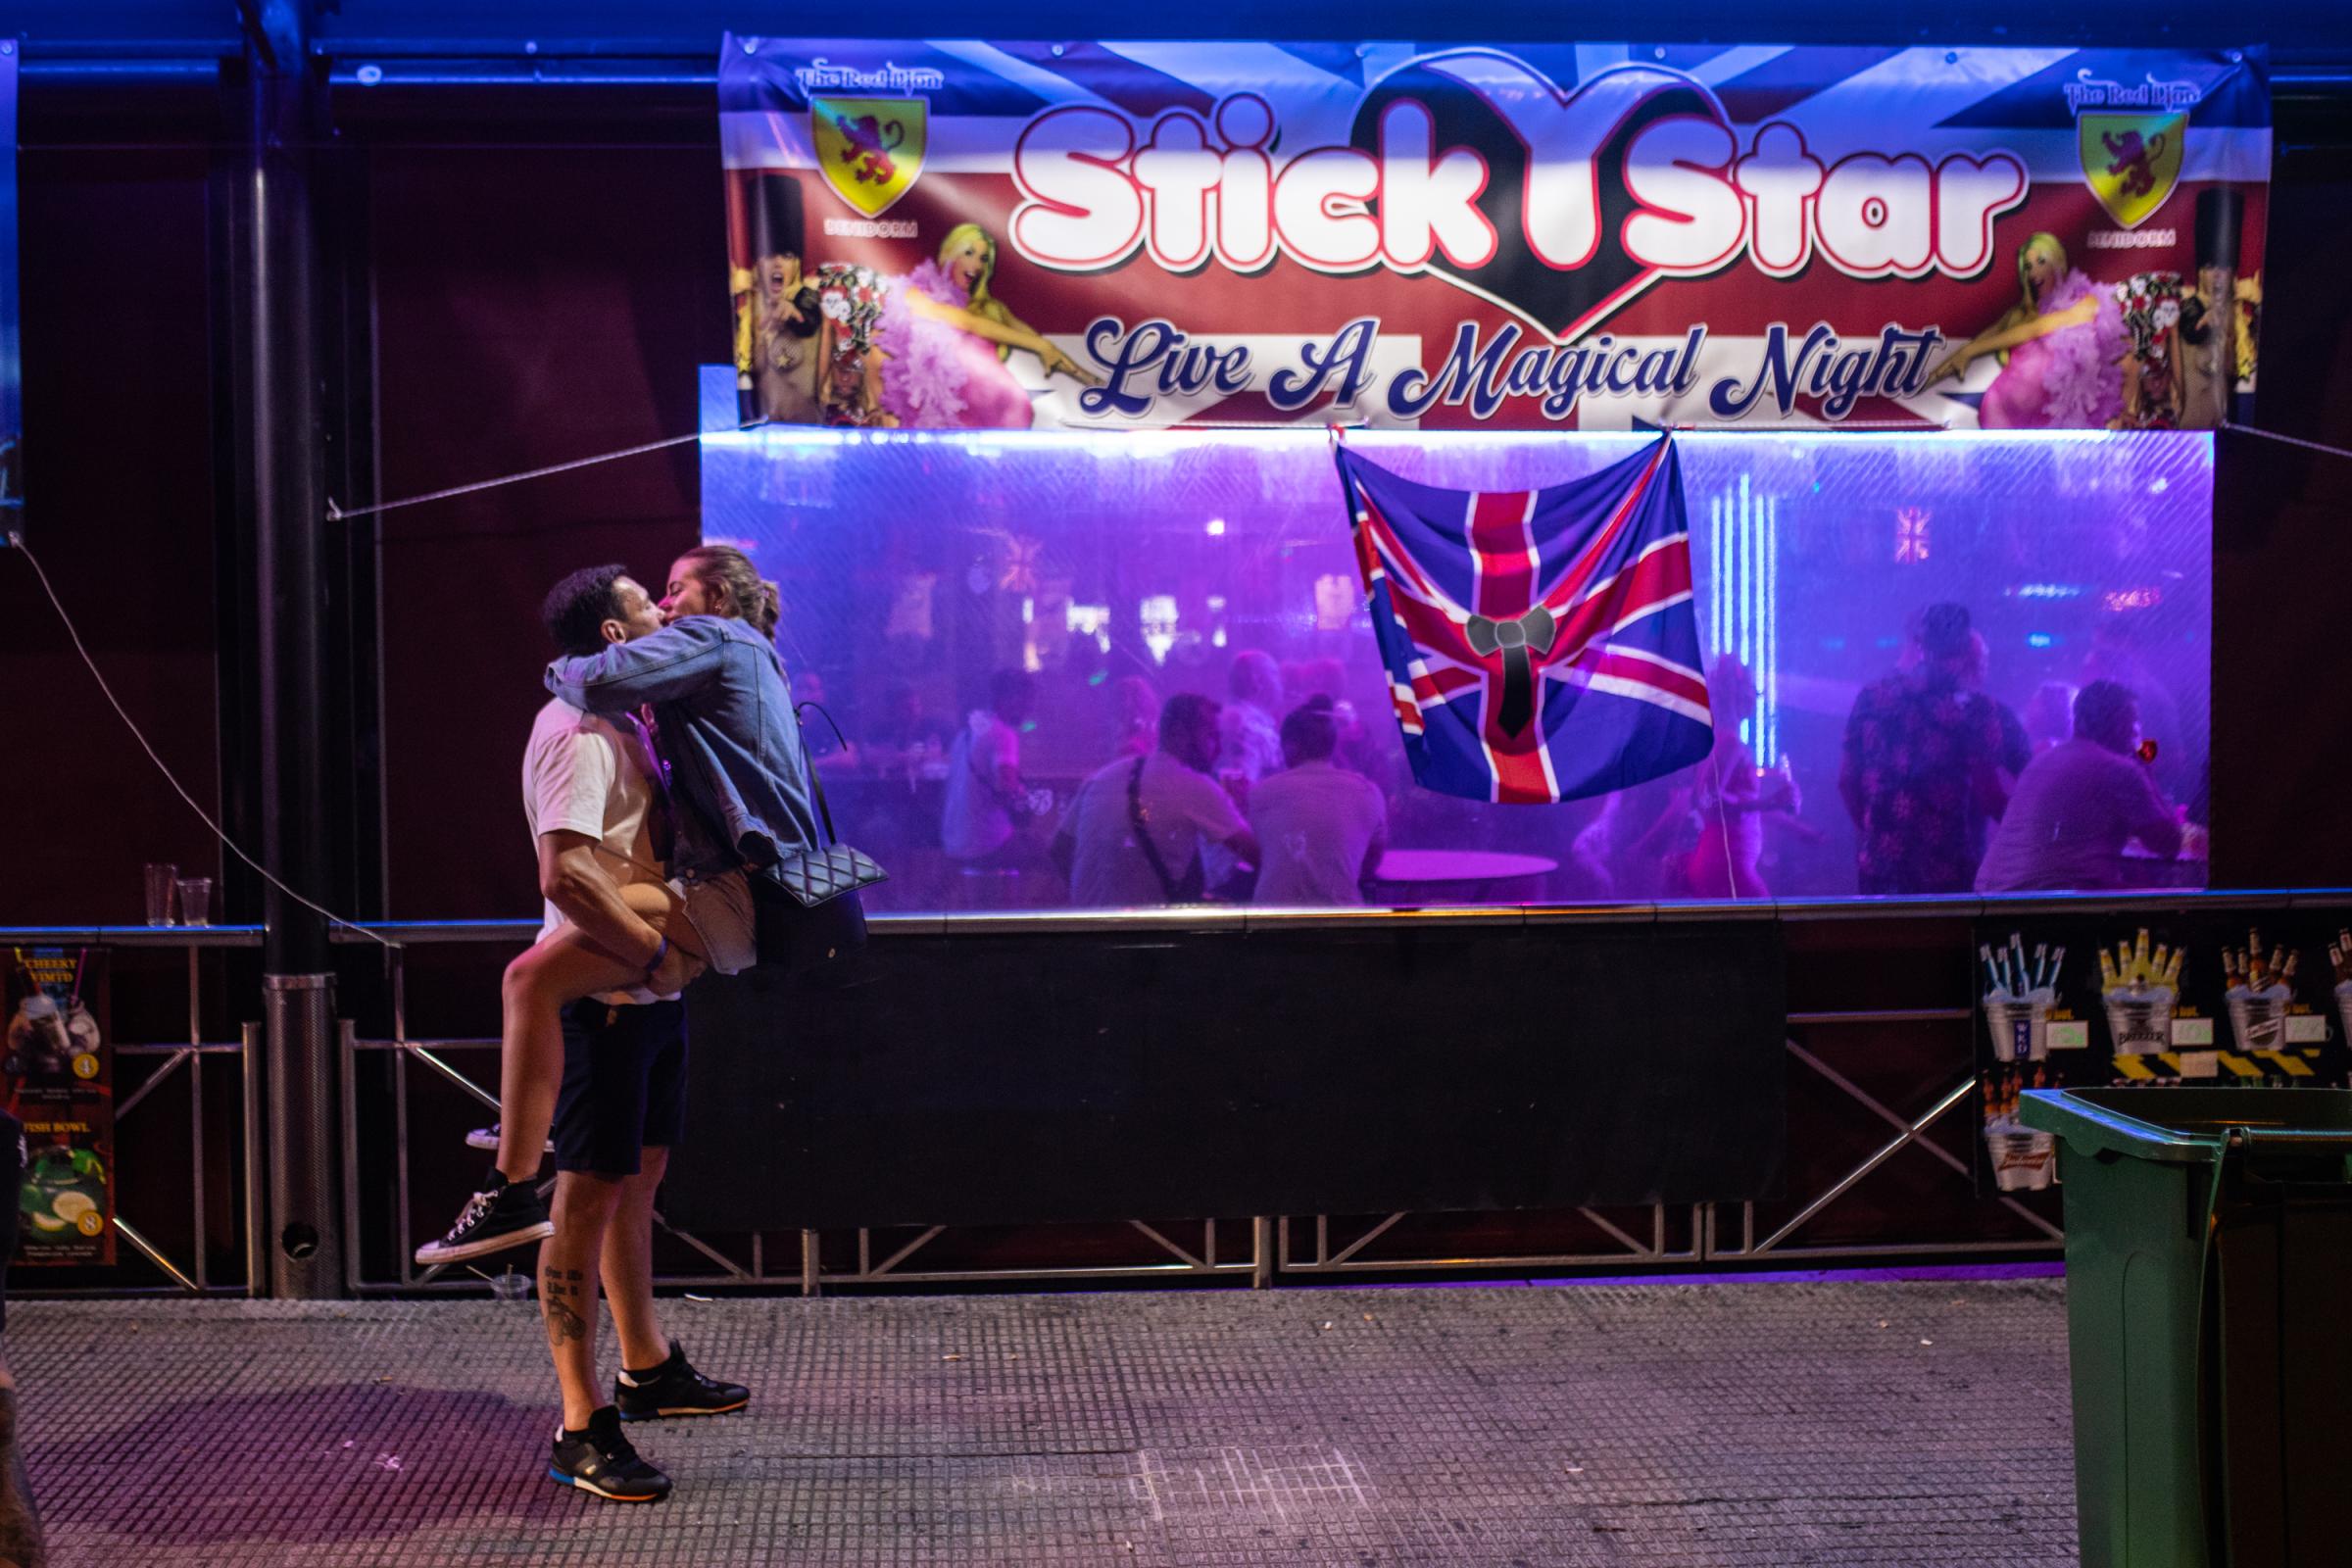 British Tourists In Benidorm Pay Tribute To Queen Elizabeth II - BENIDORM, SPAIN - SEPTEMBER 10: A couple kisses in front...